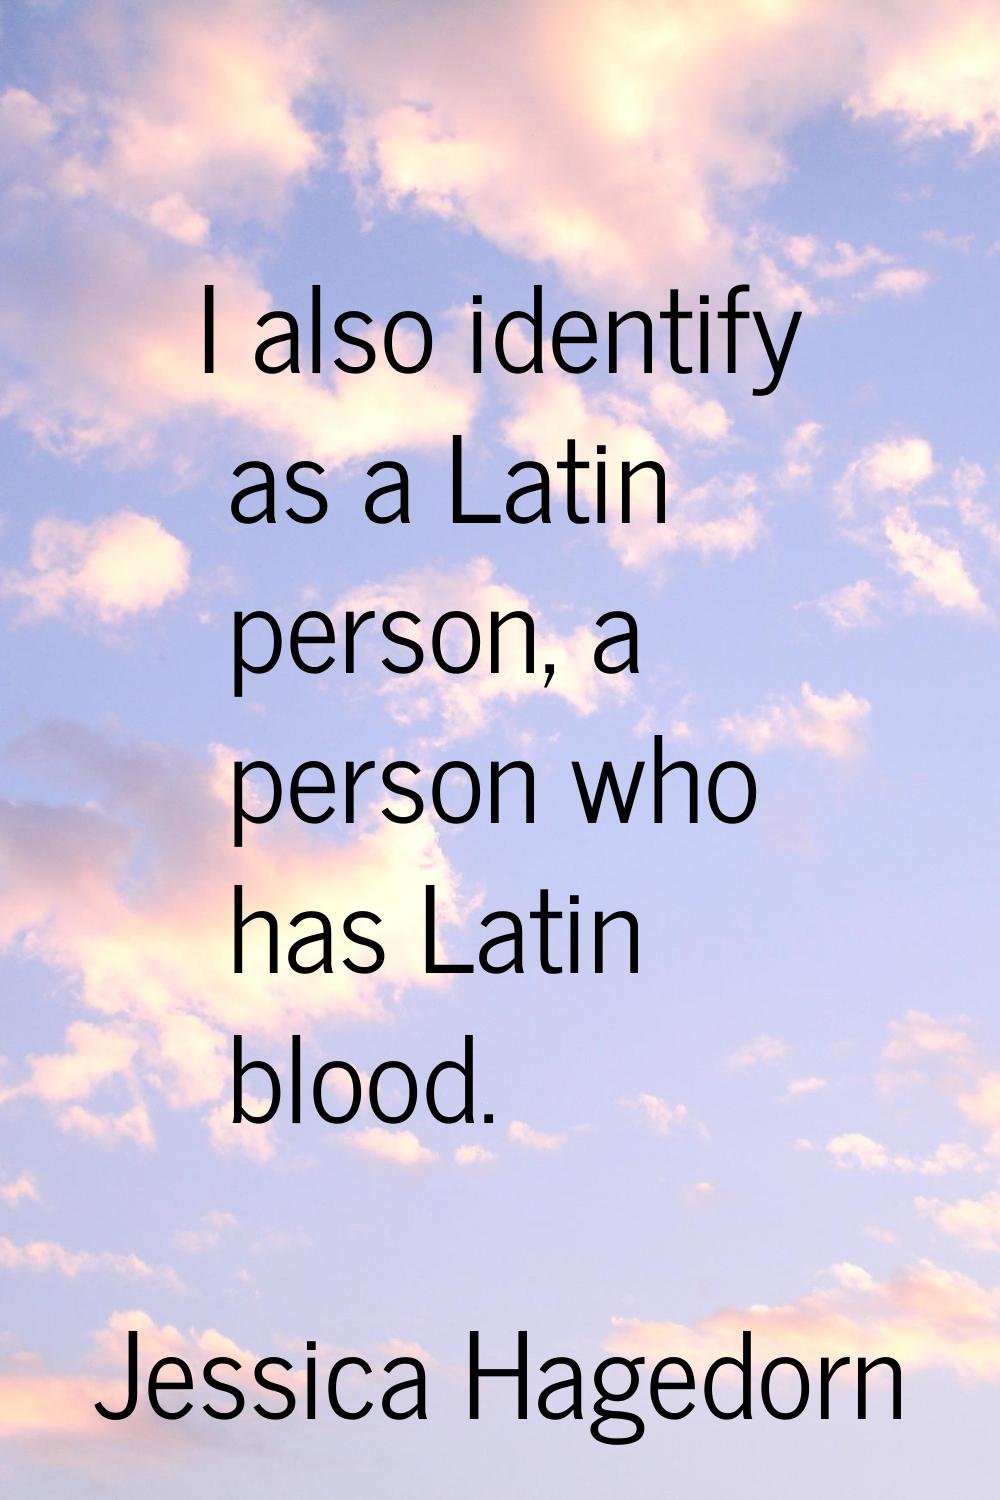 I also identify as a Latin person, a person who has Latin blood.